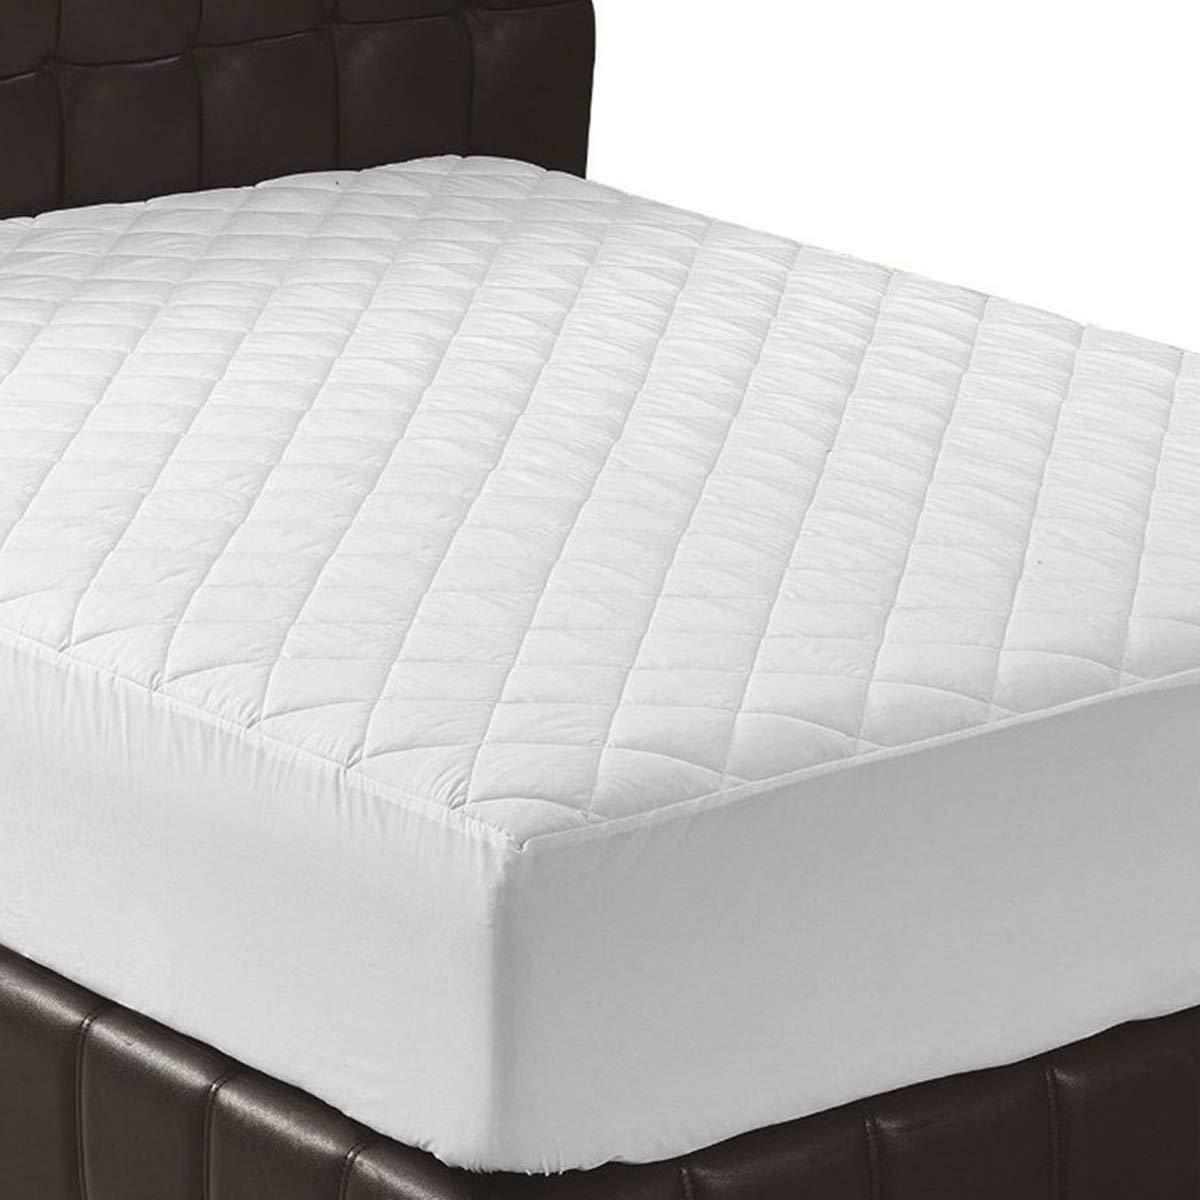 Quilted Fitted Mattress Pad Cover Fits Up To 16"  Mattress Cover Utopia Bedding